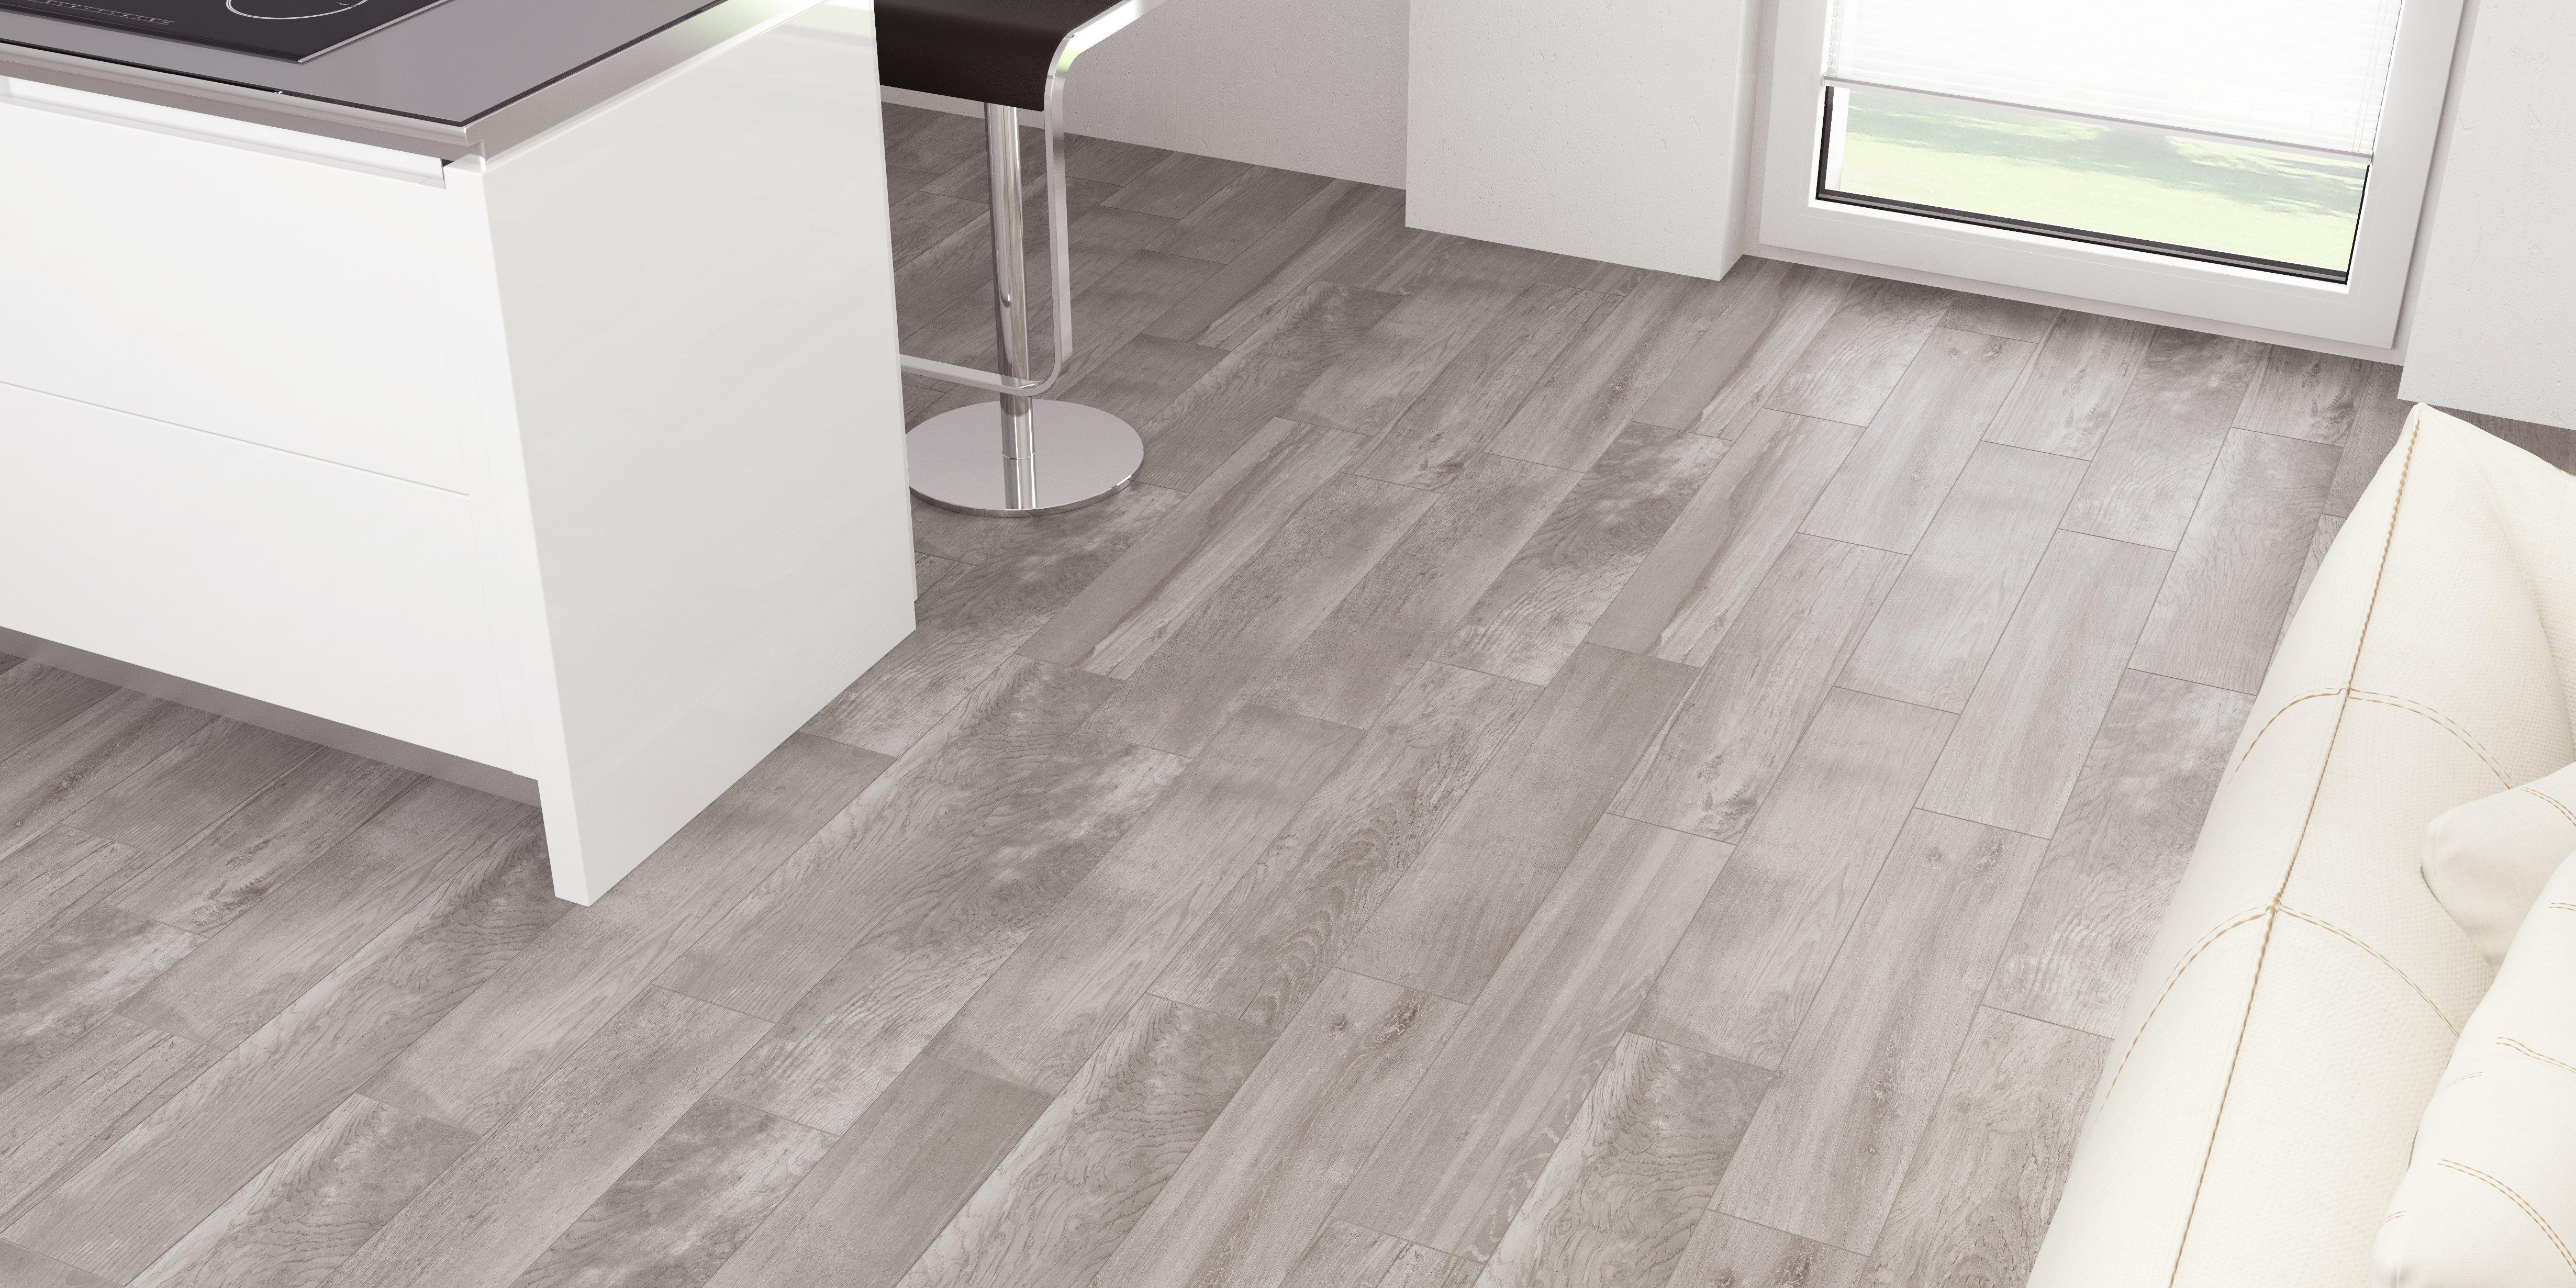 Lumber Gray Wood Plank Porcelain Tile, How To Install A Wood Look Porcelain Plank Tile Floor